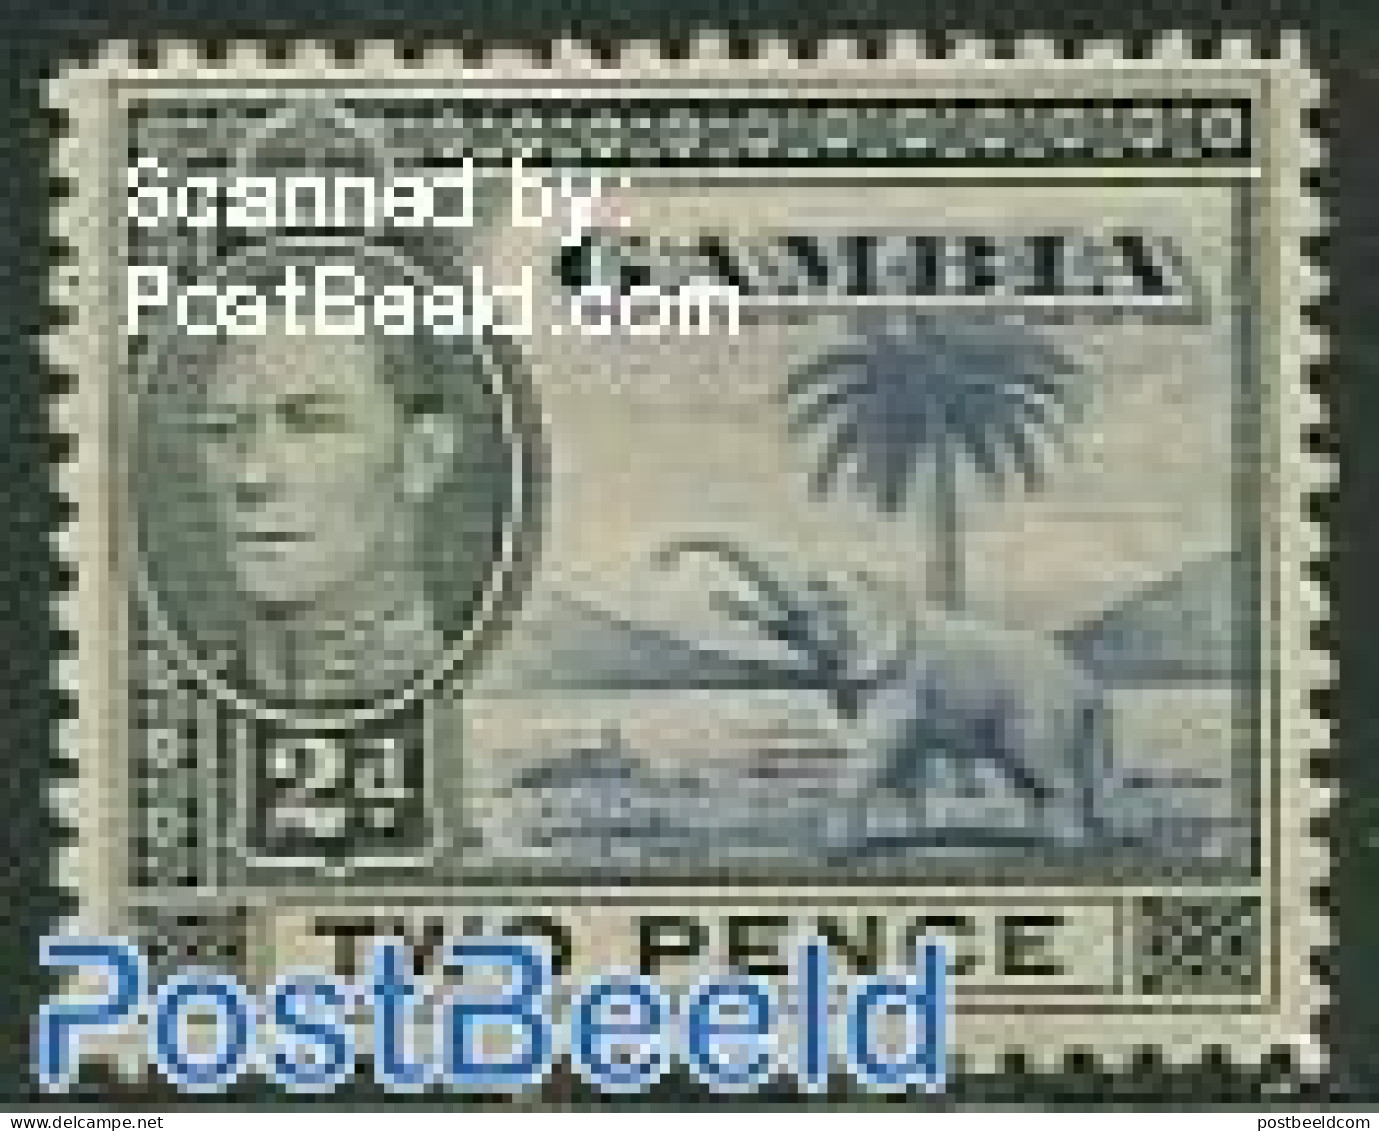 Gambia 1938 2p, Stamp Out Of Set, Mint NH, Nature - Elephants - Gambia (...-1964)